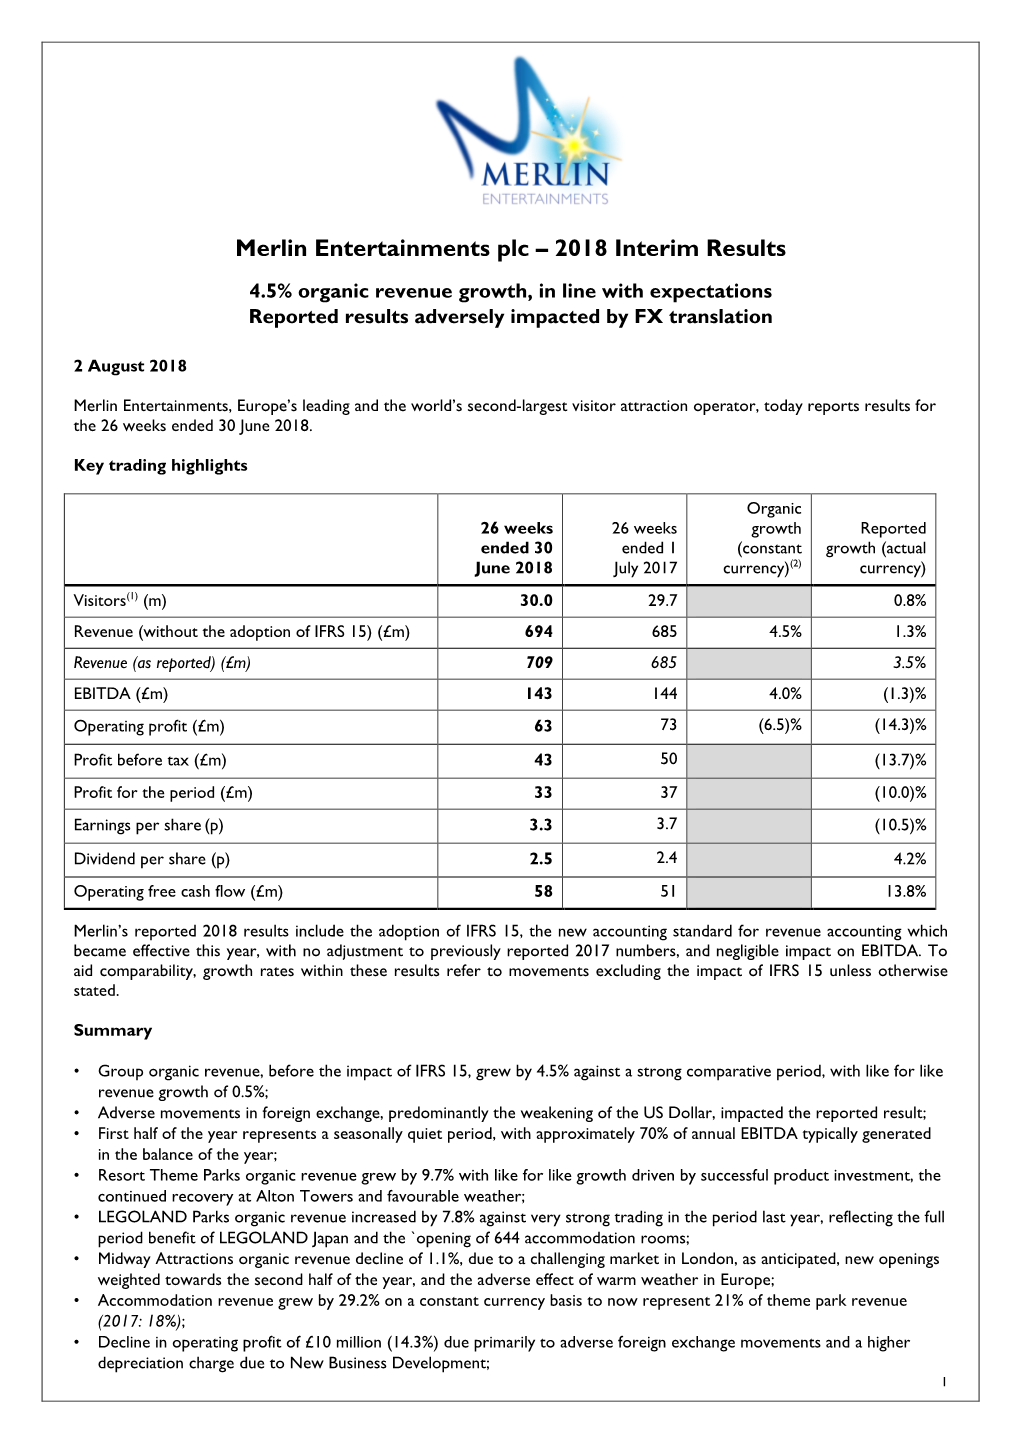 Merlin Entertainments Plc – 2018 Interim Results 4.5% Organic Revenue Growth, in Line with Expectations Reported Results Adversely Impacted by FX Translation